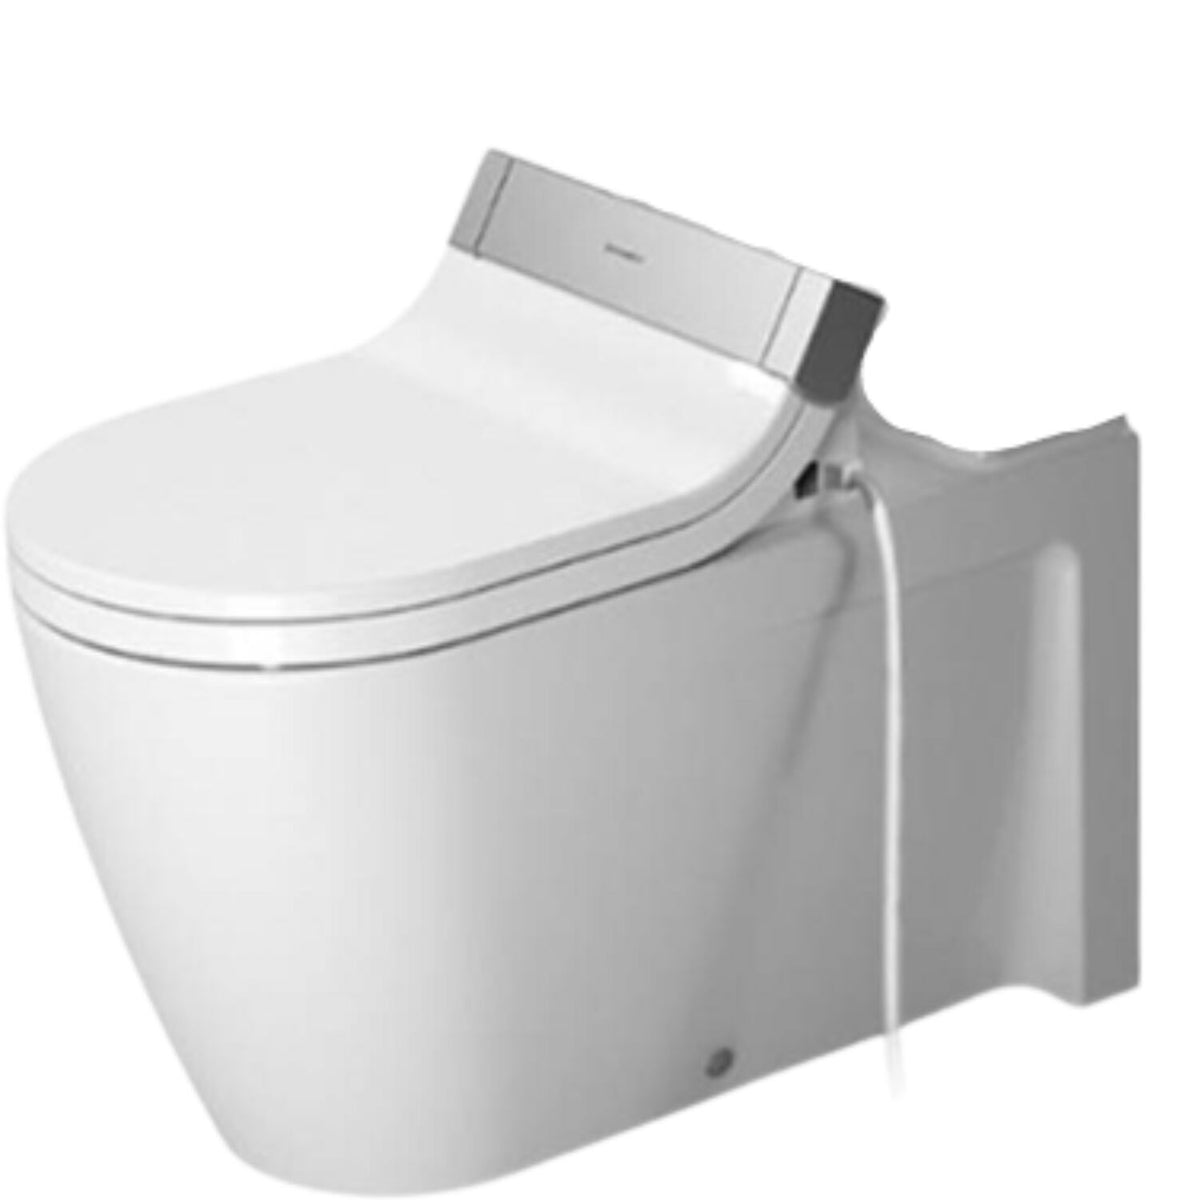 STARCK 2 CLOSE-COUPLED TWO-PIECE TOILET BOWL ONLY